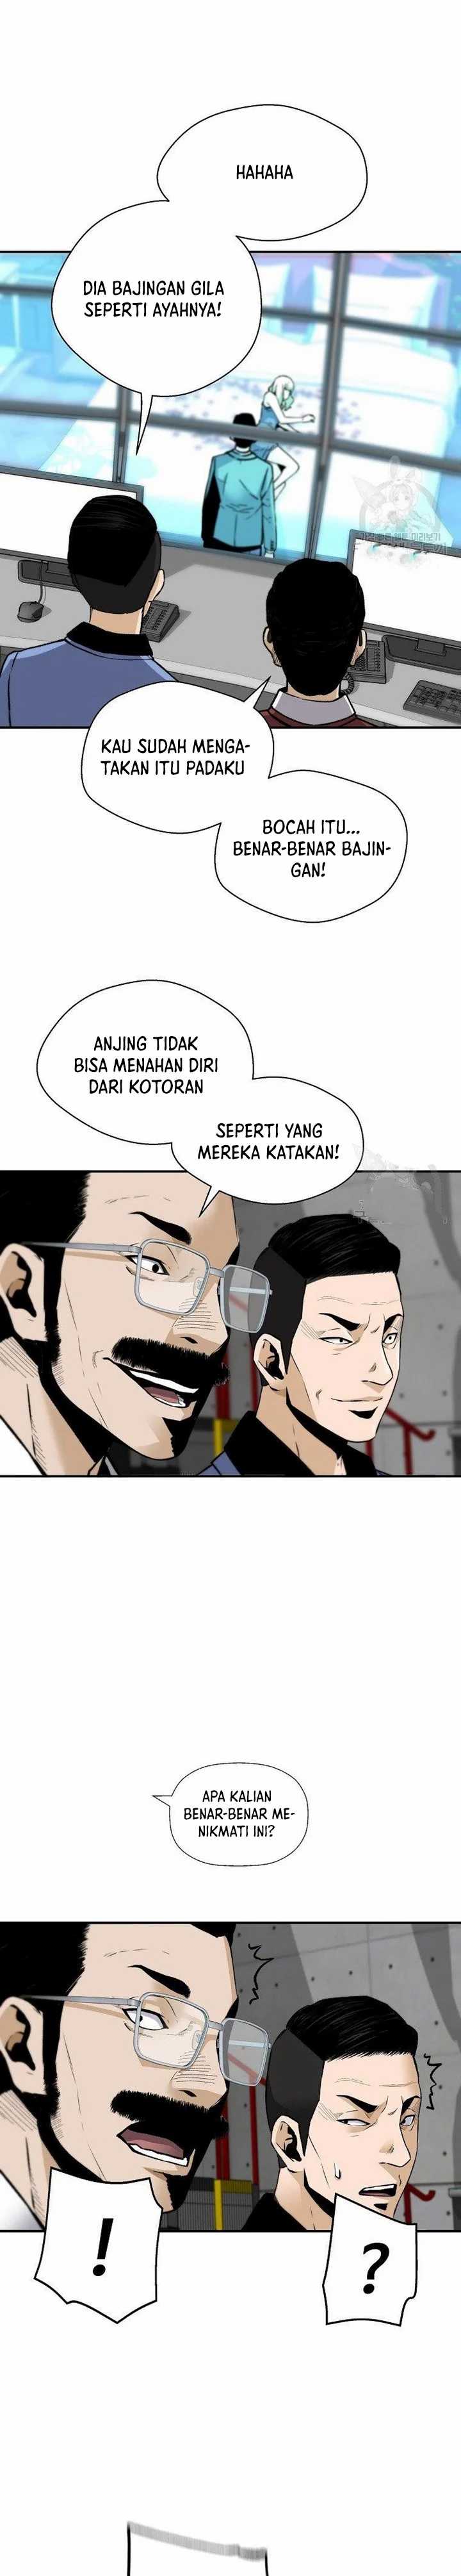 Return of the Legend Chapter 57